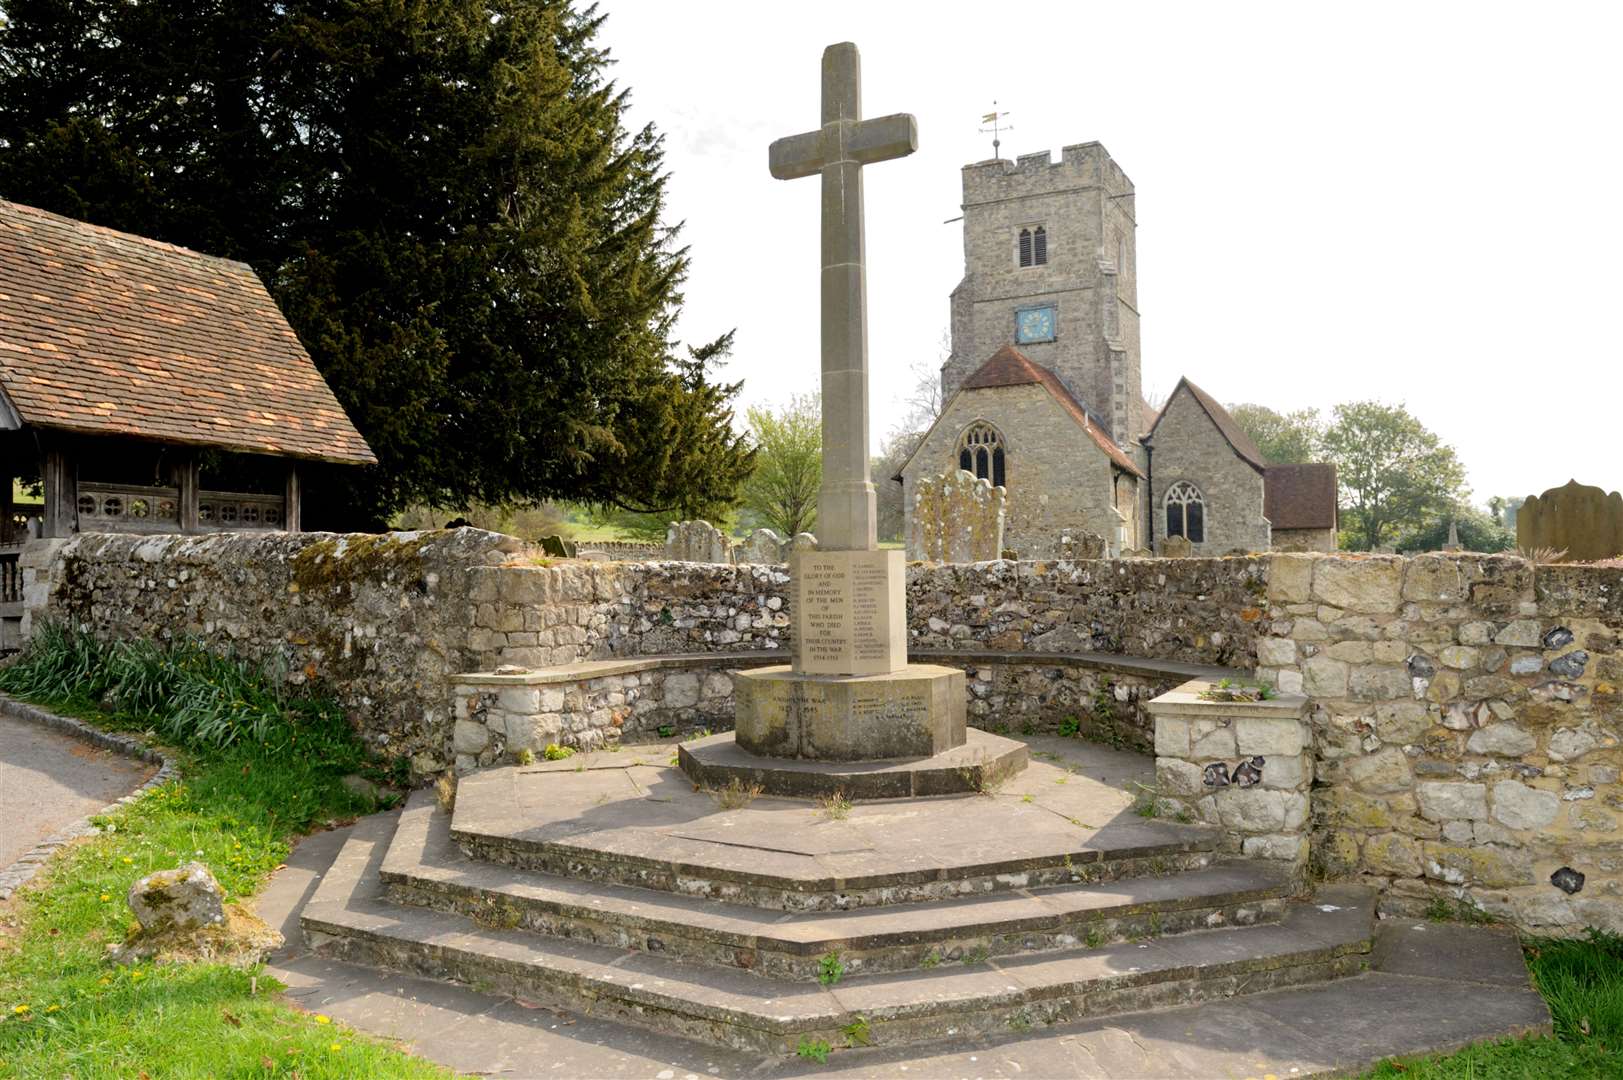 Boxley War Memorial, close to St Mary and All Saints Church